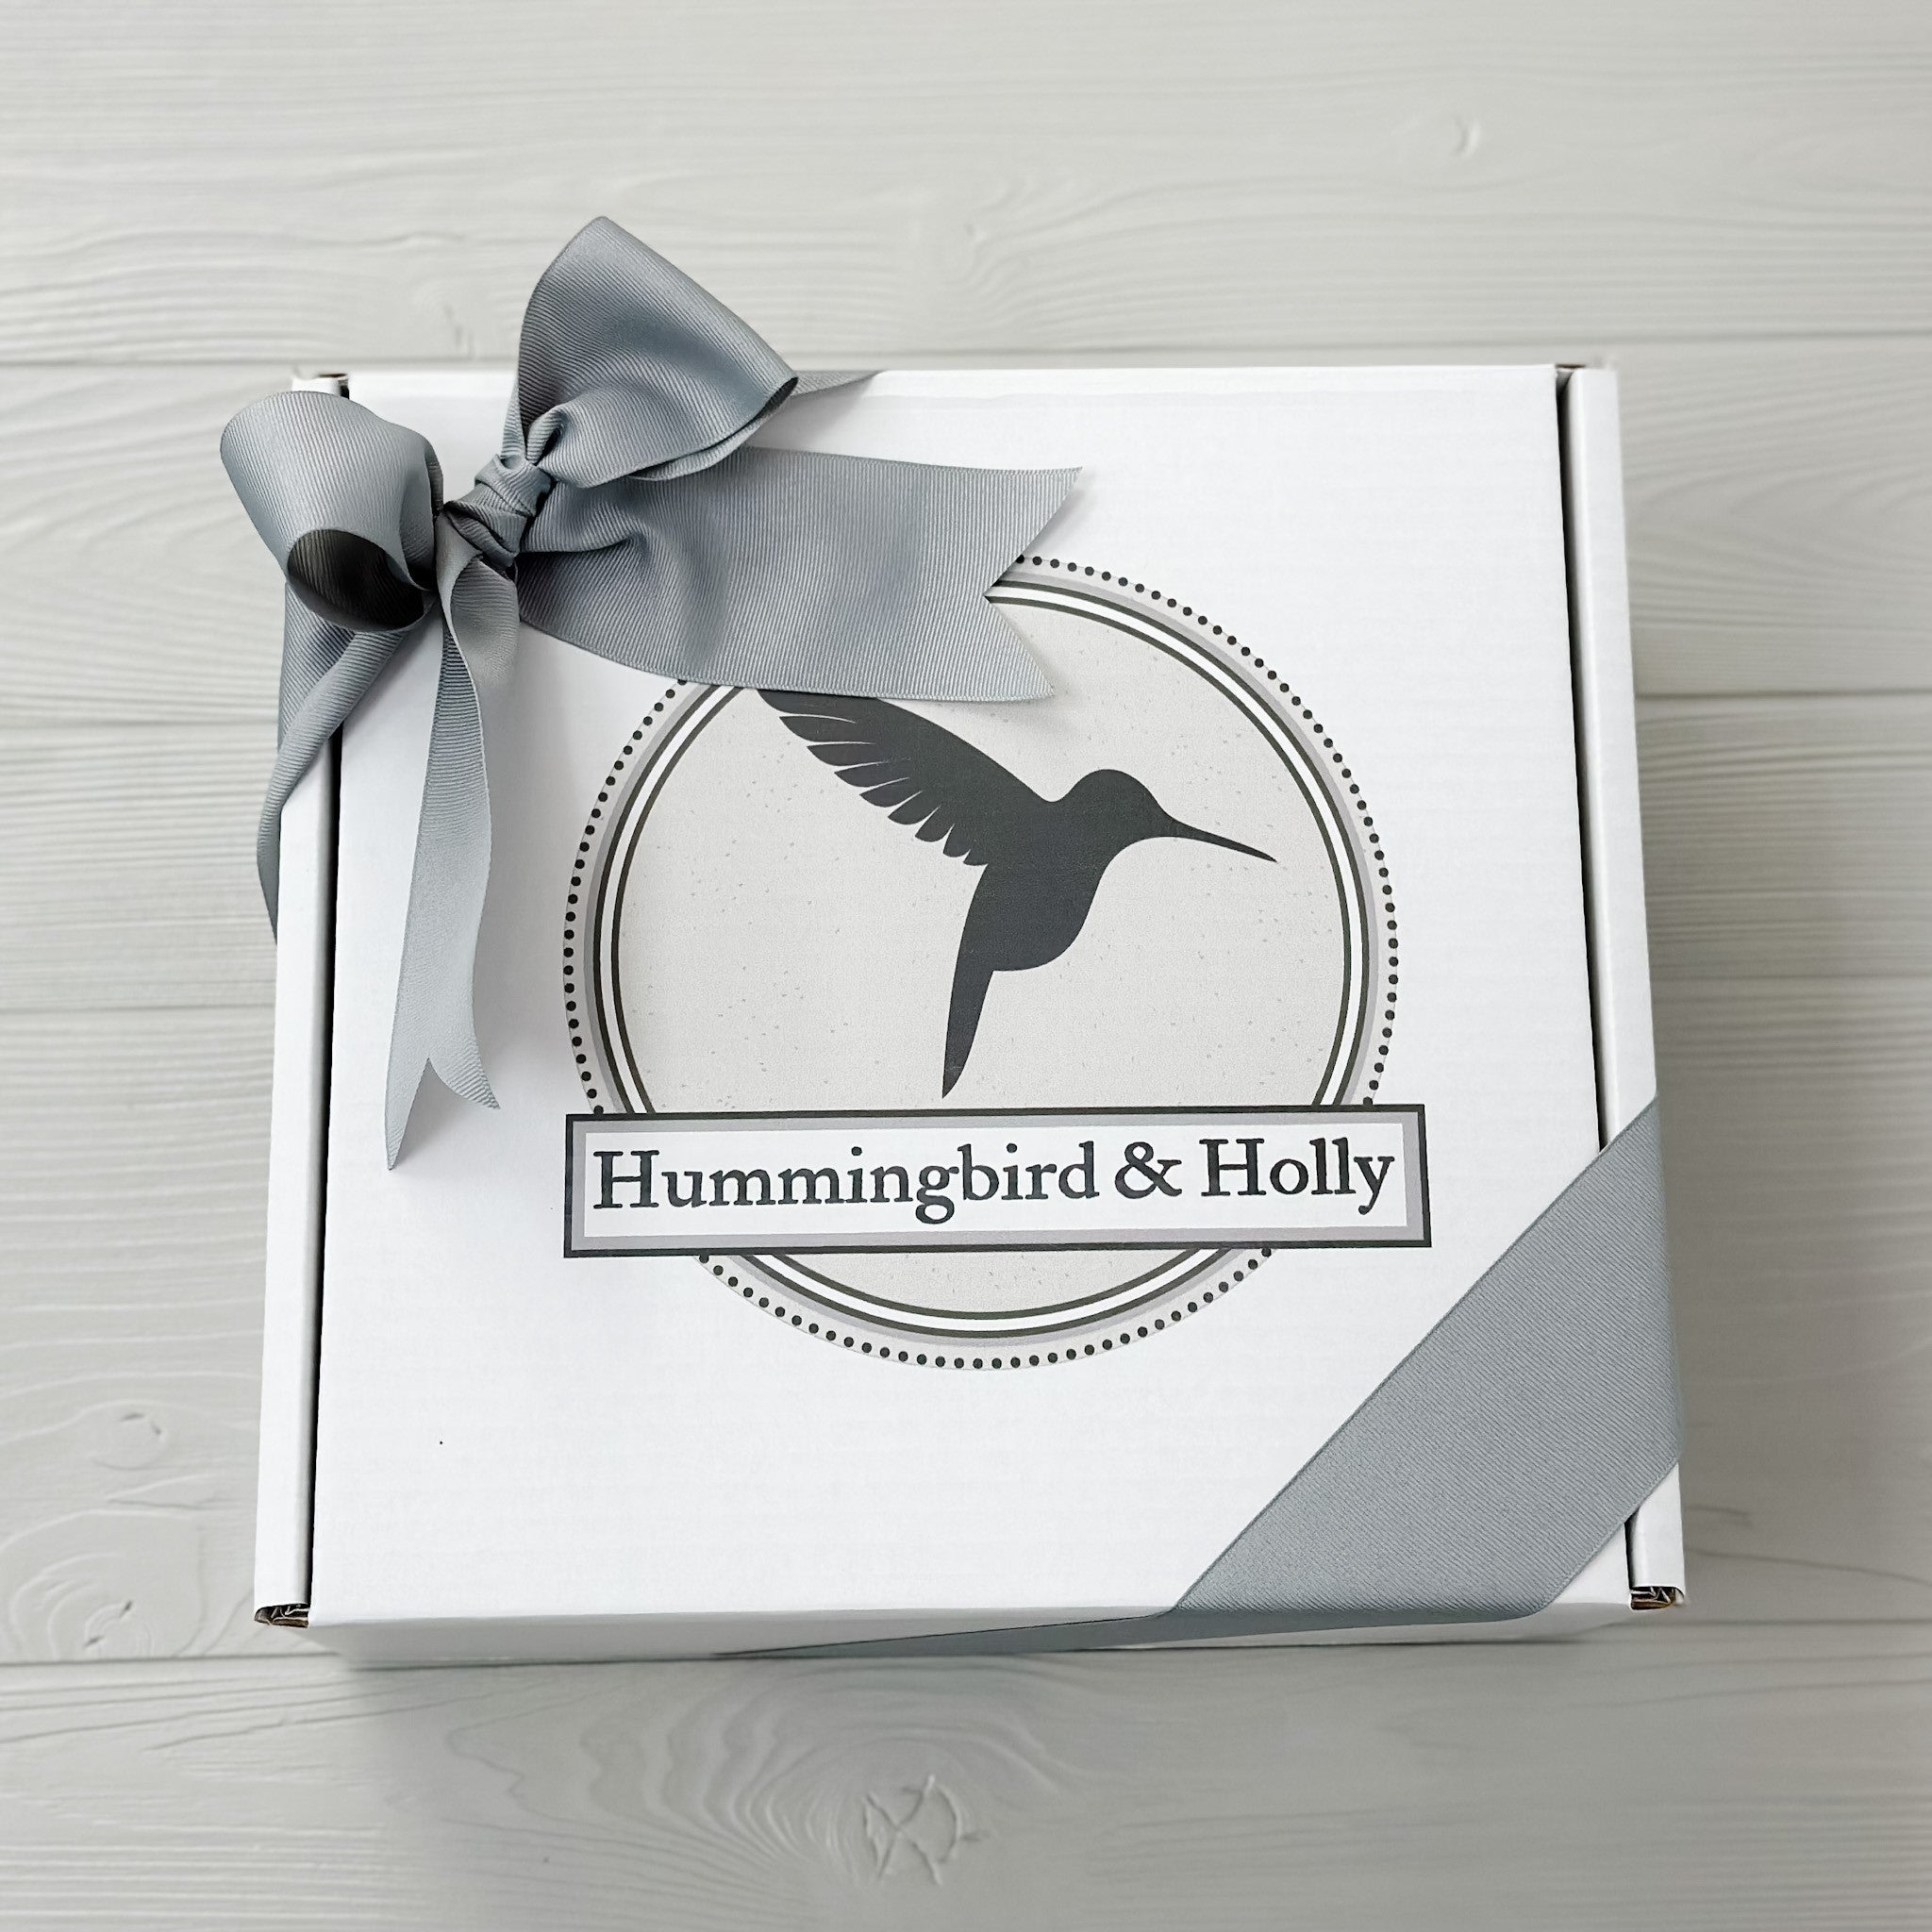 gift box with Hummingbird and Holly logo included in Puppy love gift basket